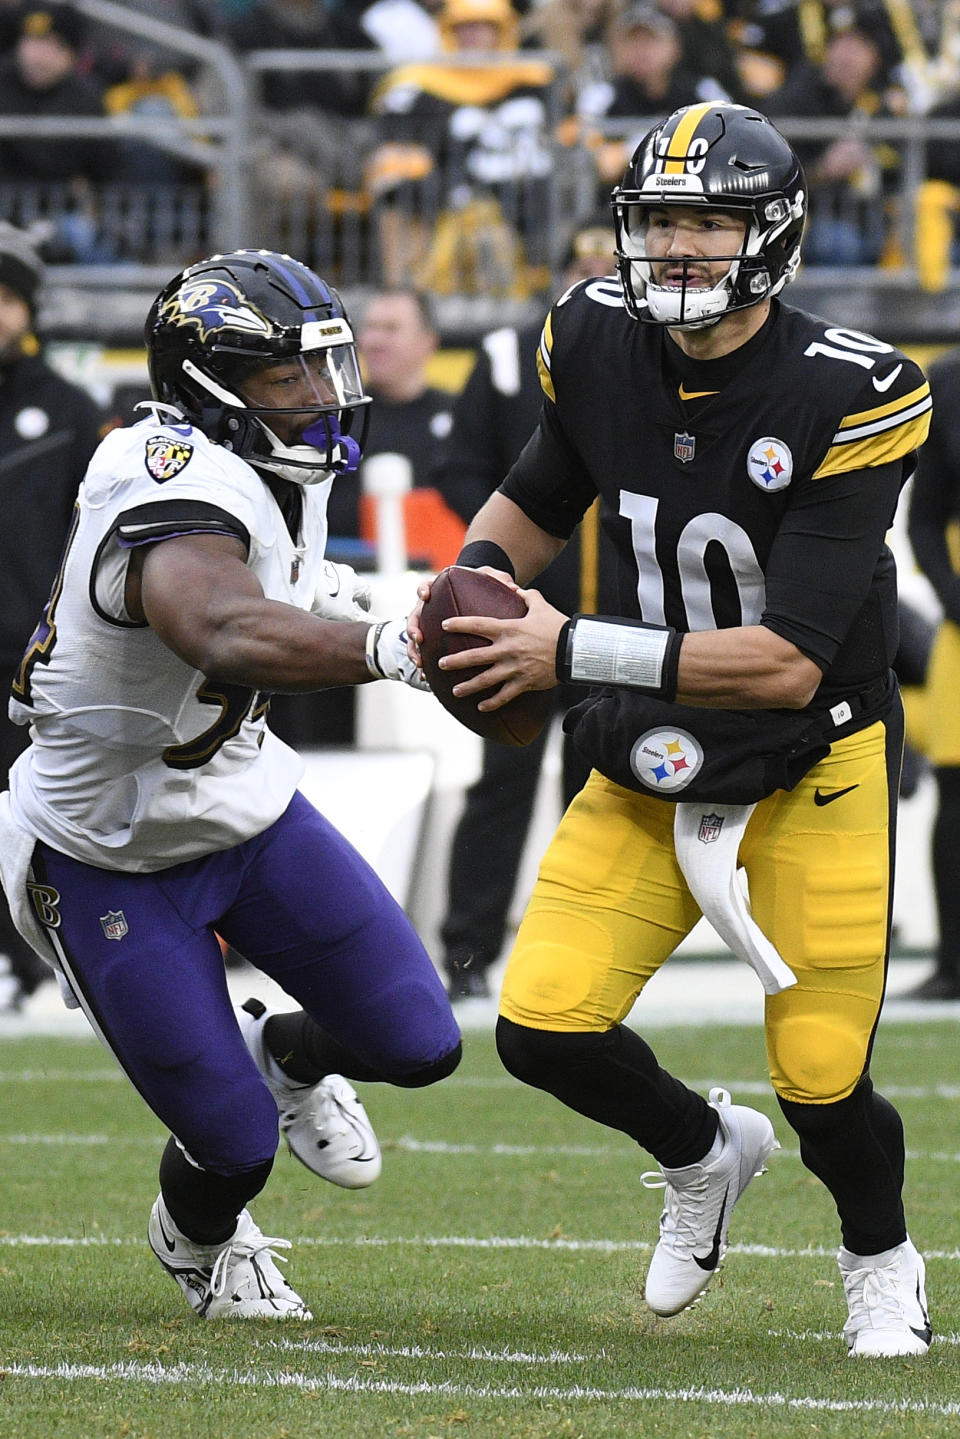 Pittsburgh Steelers quarterback Mitch Trubisky (10) looks to pass under pressure from Baltimore Ravens linebacker Tyus Bowser during the second half of an NFL football game in Pittsburgh, Sunday, Dec. 11, 2022. (AP Photo/Don Wright)